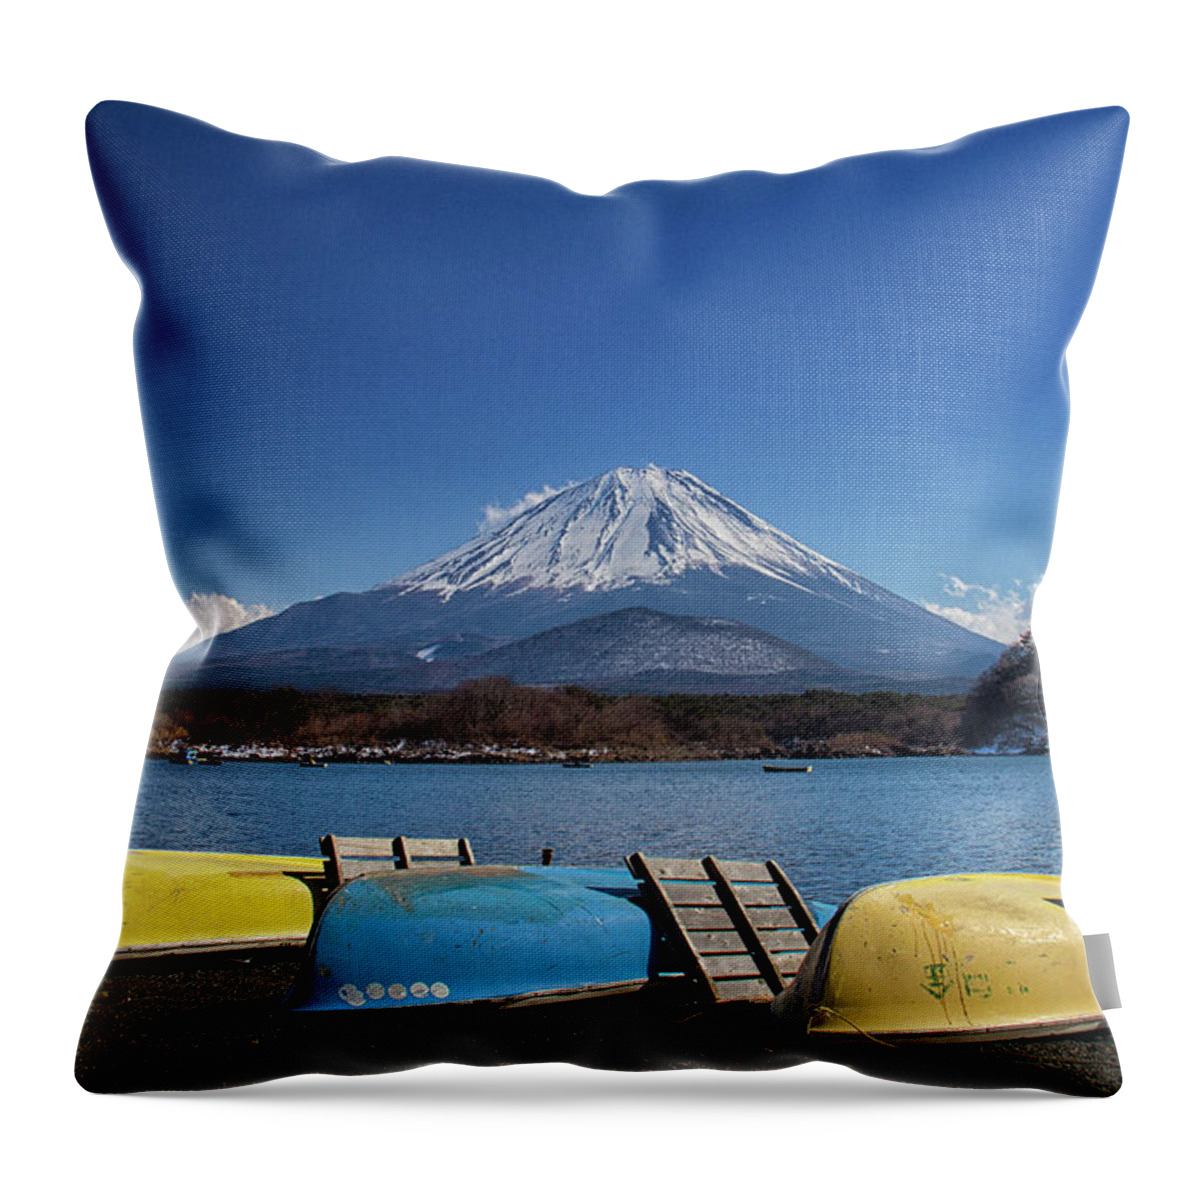 Tranquility Throw Pillow featuring the photograph Triple by I Kadek Wismalana